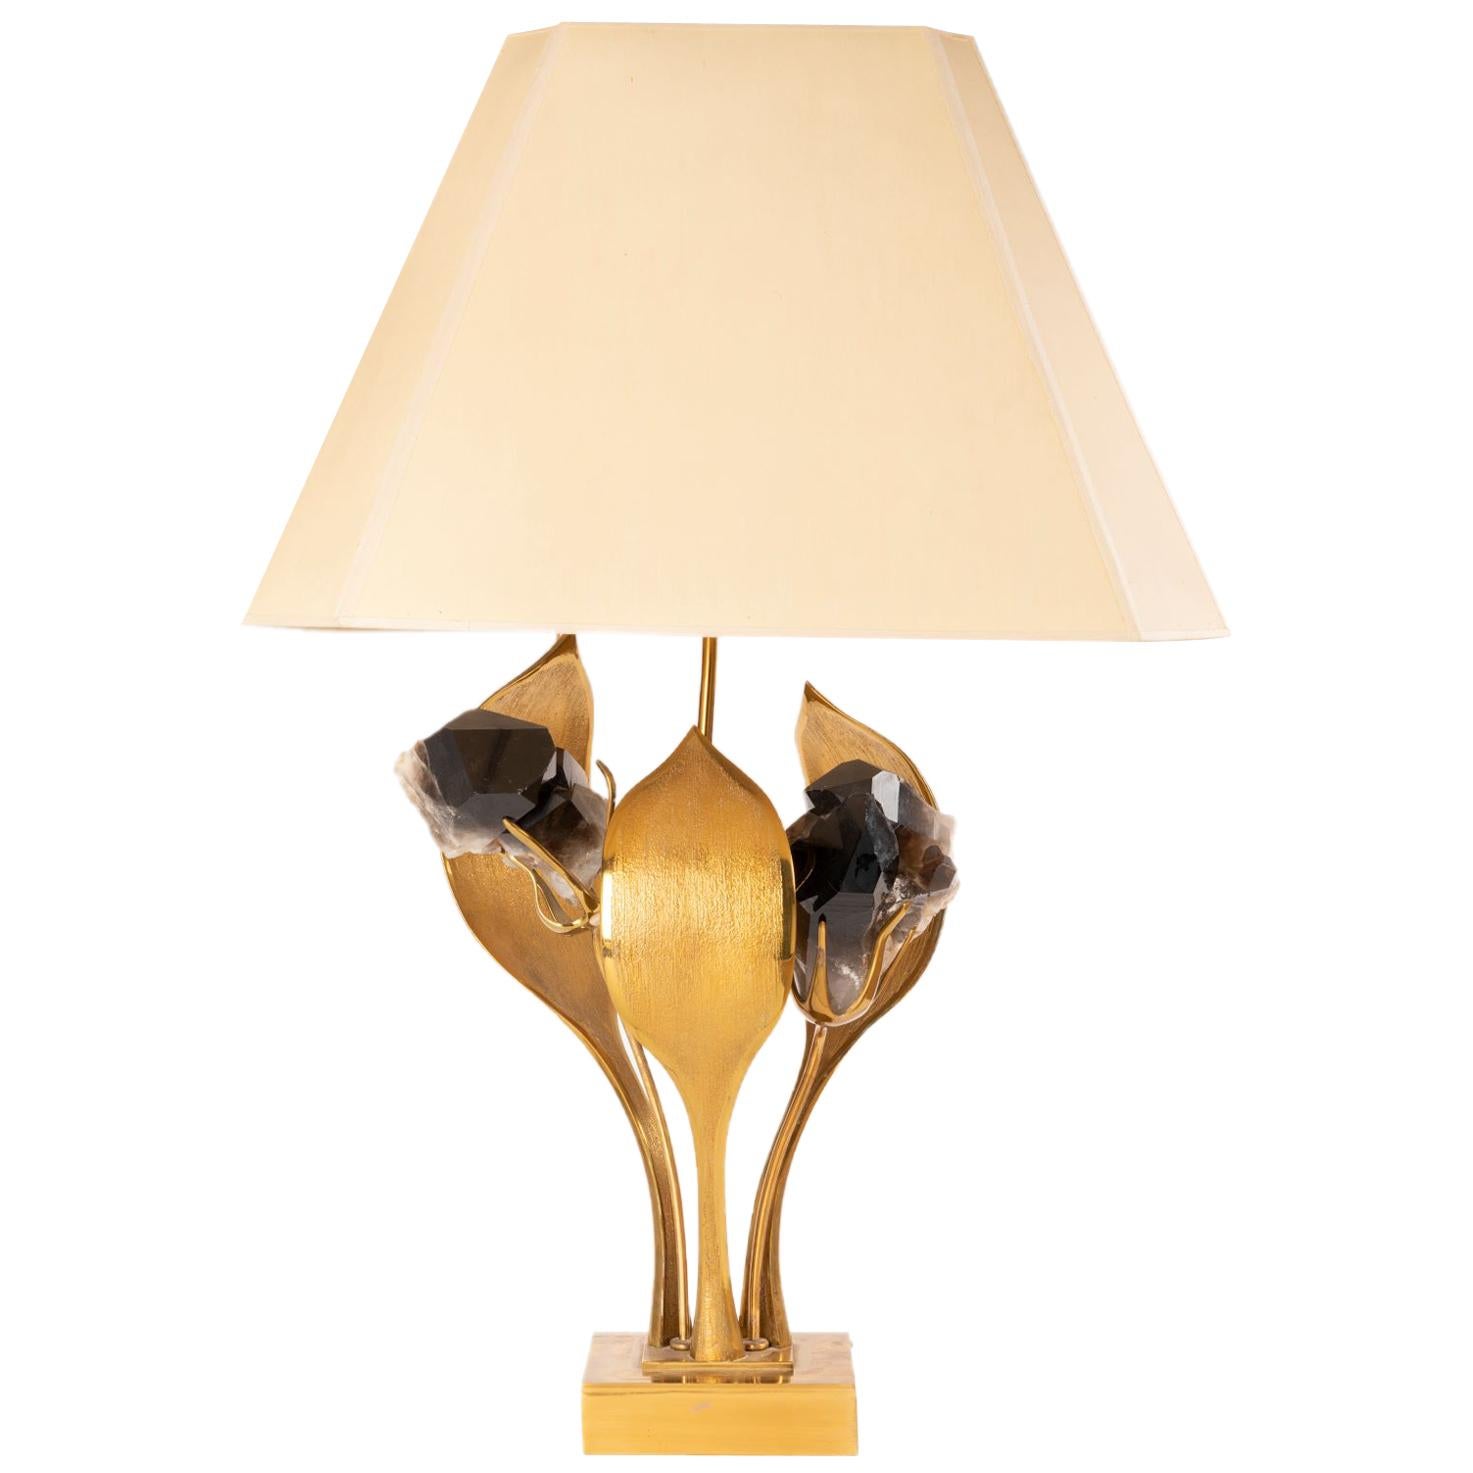 Rare Gilded Brass and Black Quartz "Flower" Lamp by Willy Daro, France, 1970s For Sale